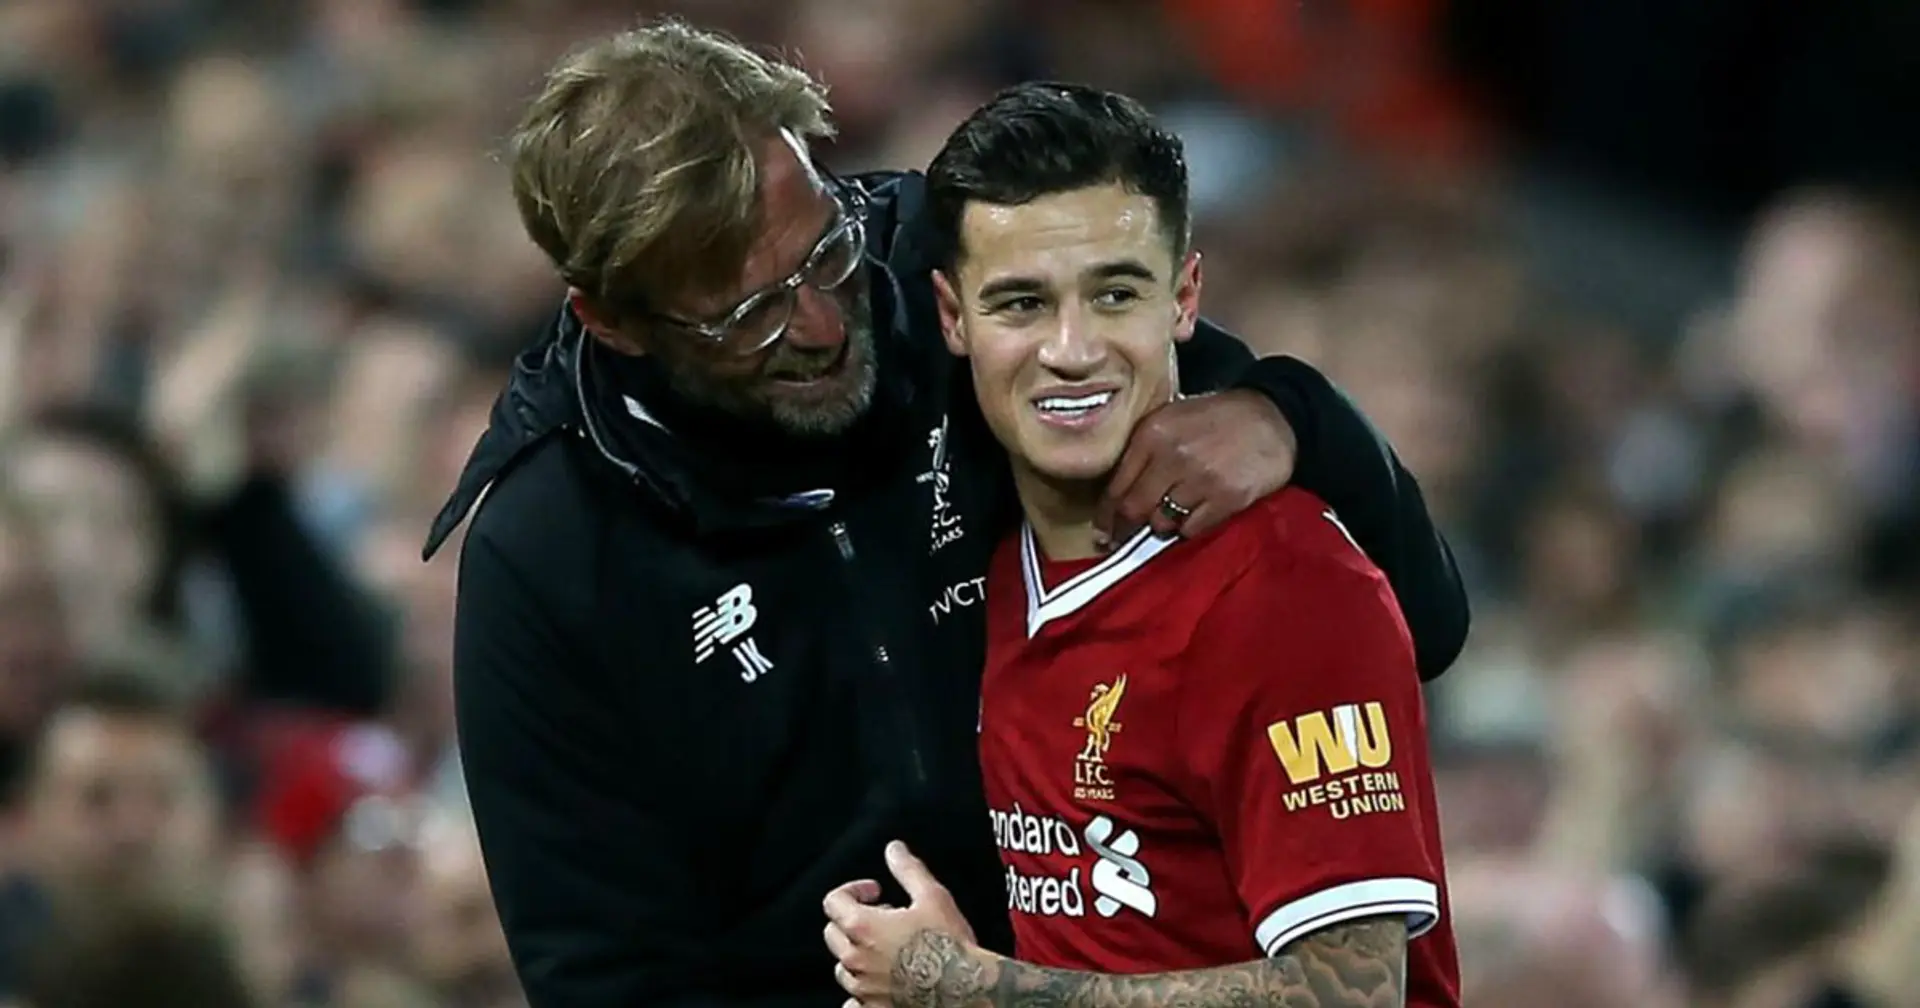 'I'll tell my grandkids I was trained by one of the best coaches': 5 players who were grateful to Jurgen Klopp even though they left his club